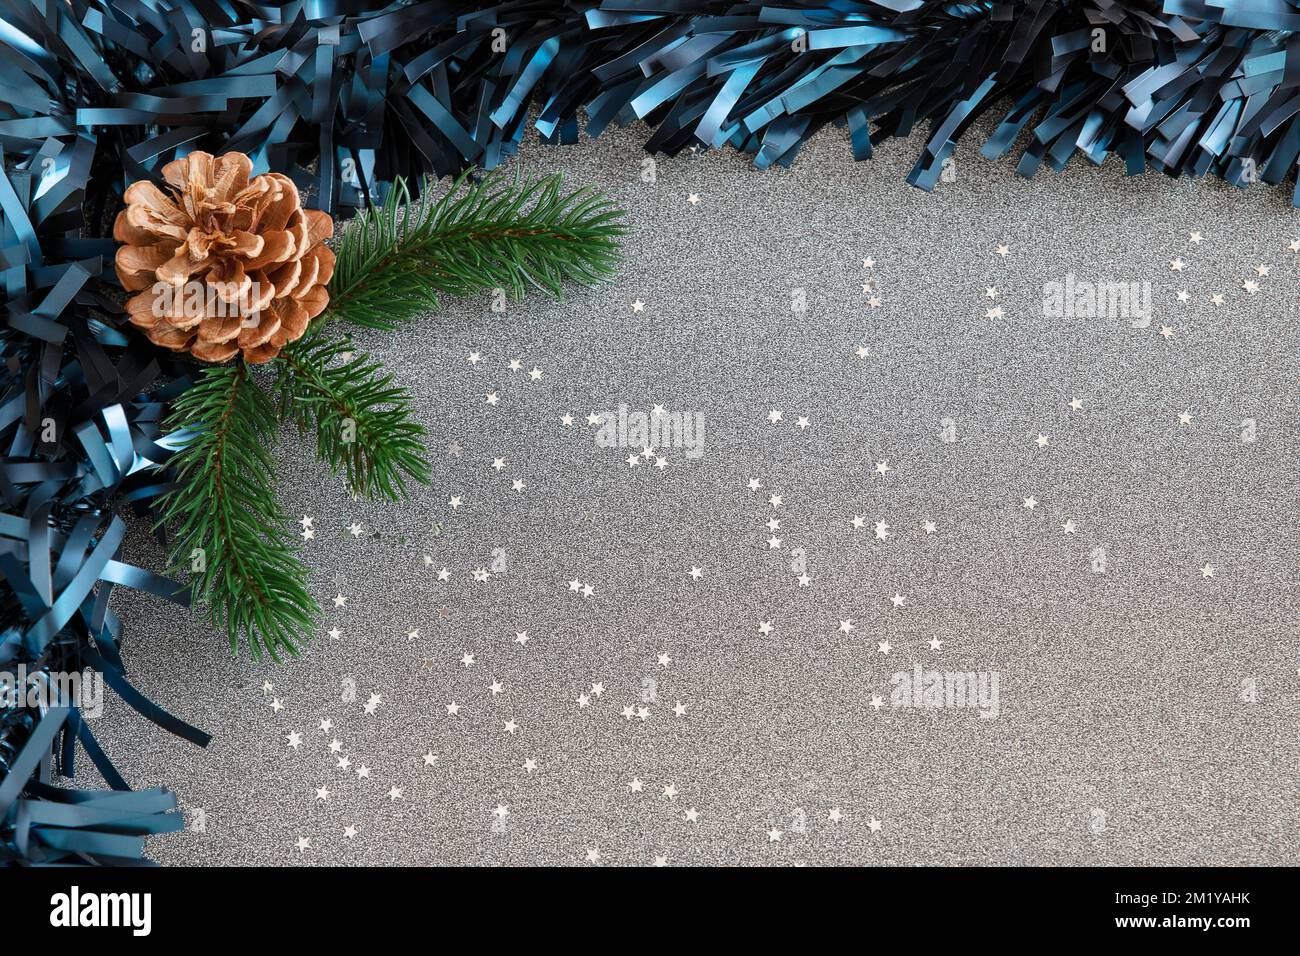 Festive frame with blue tinsel, a pine cone and fresh pine brunches, and sparkling confetti stars spread against a silver gray background Stock Photo